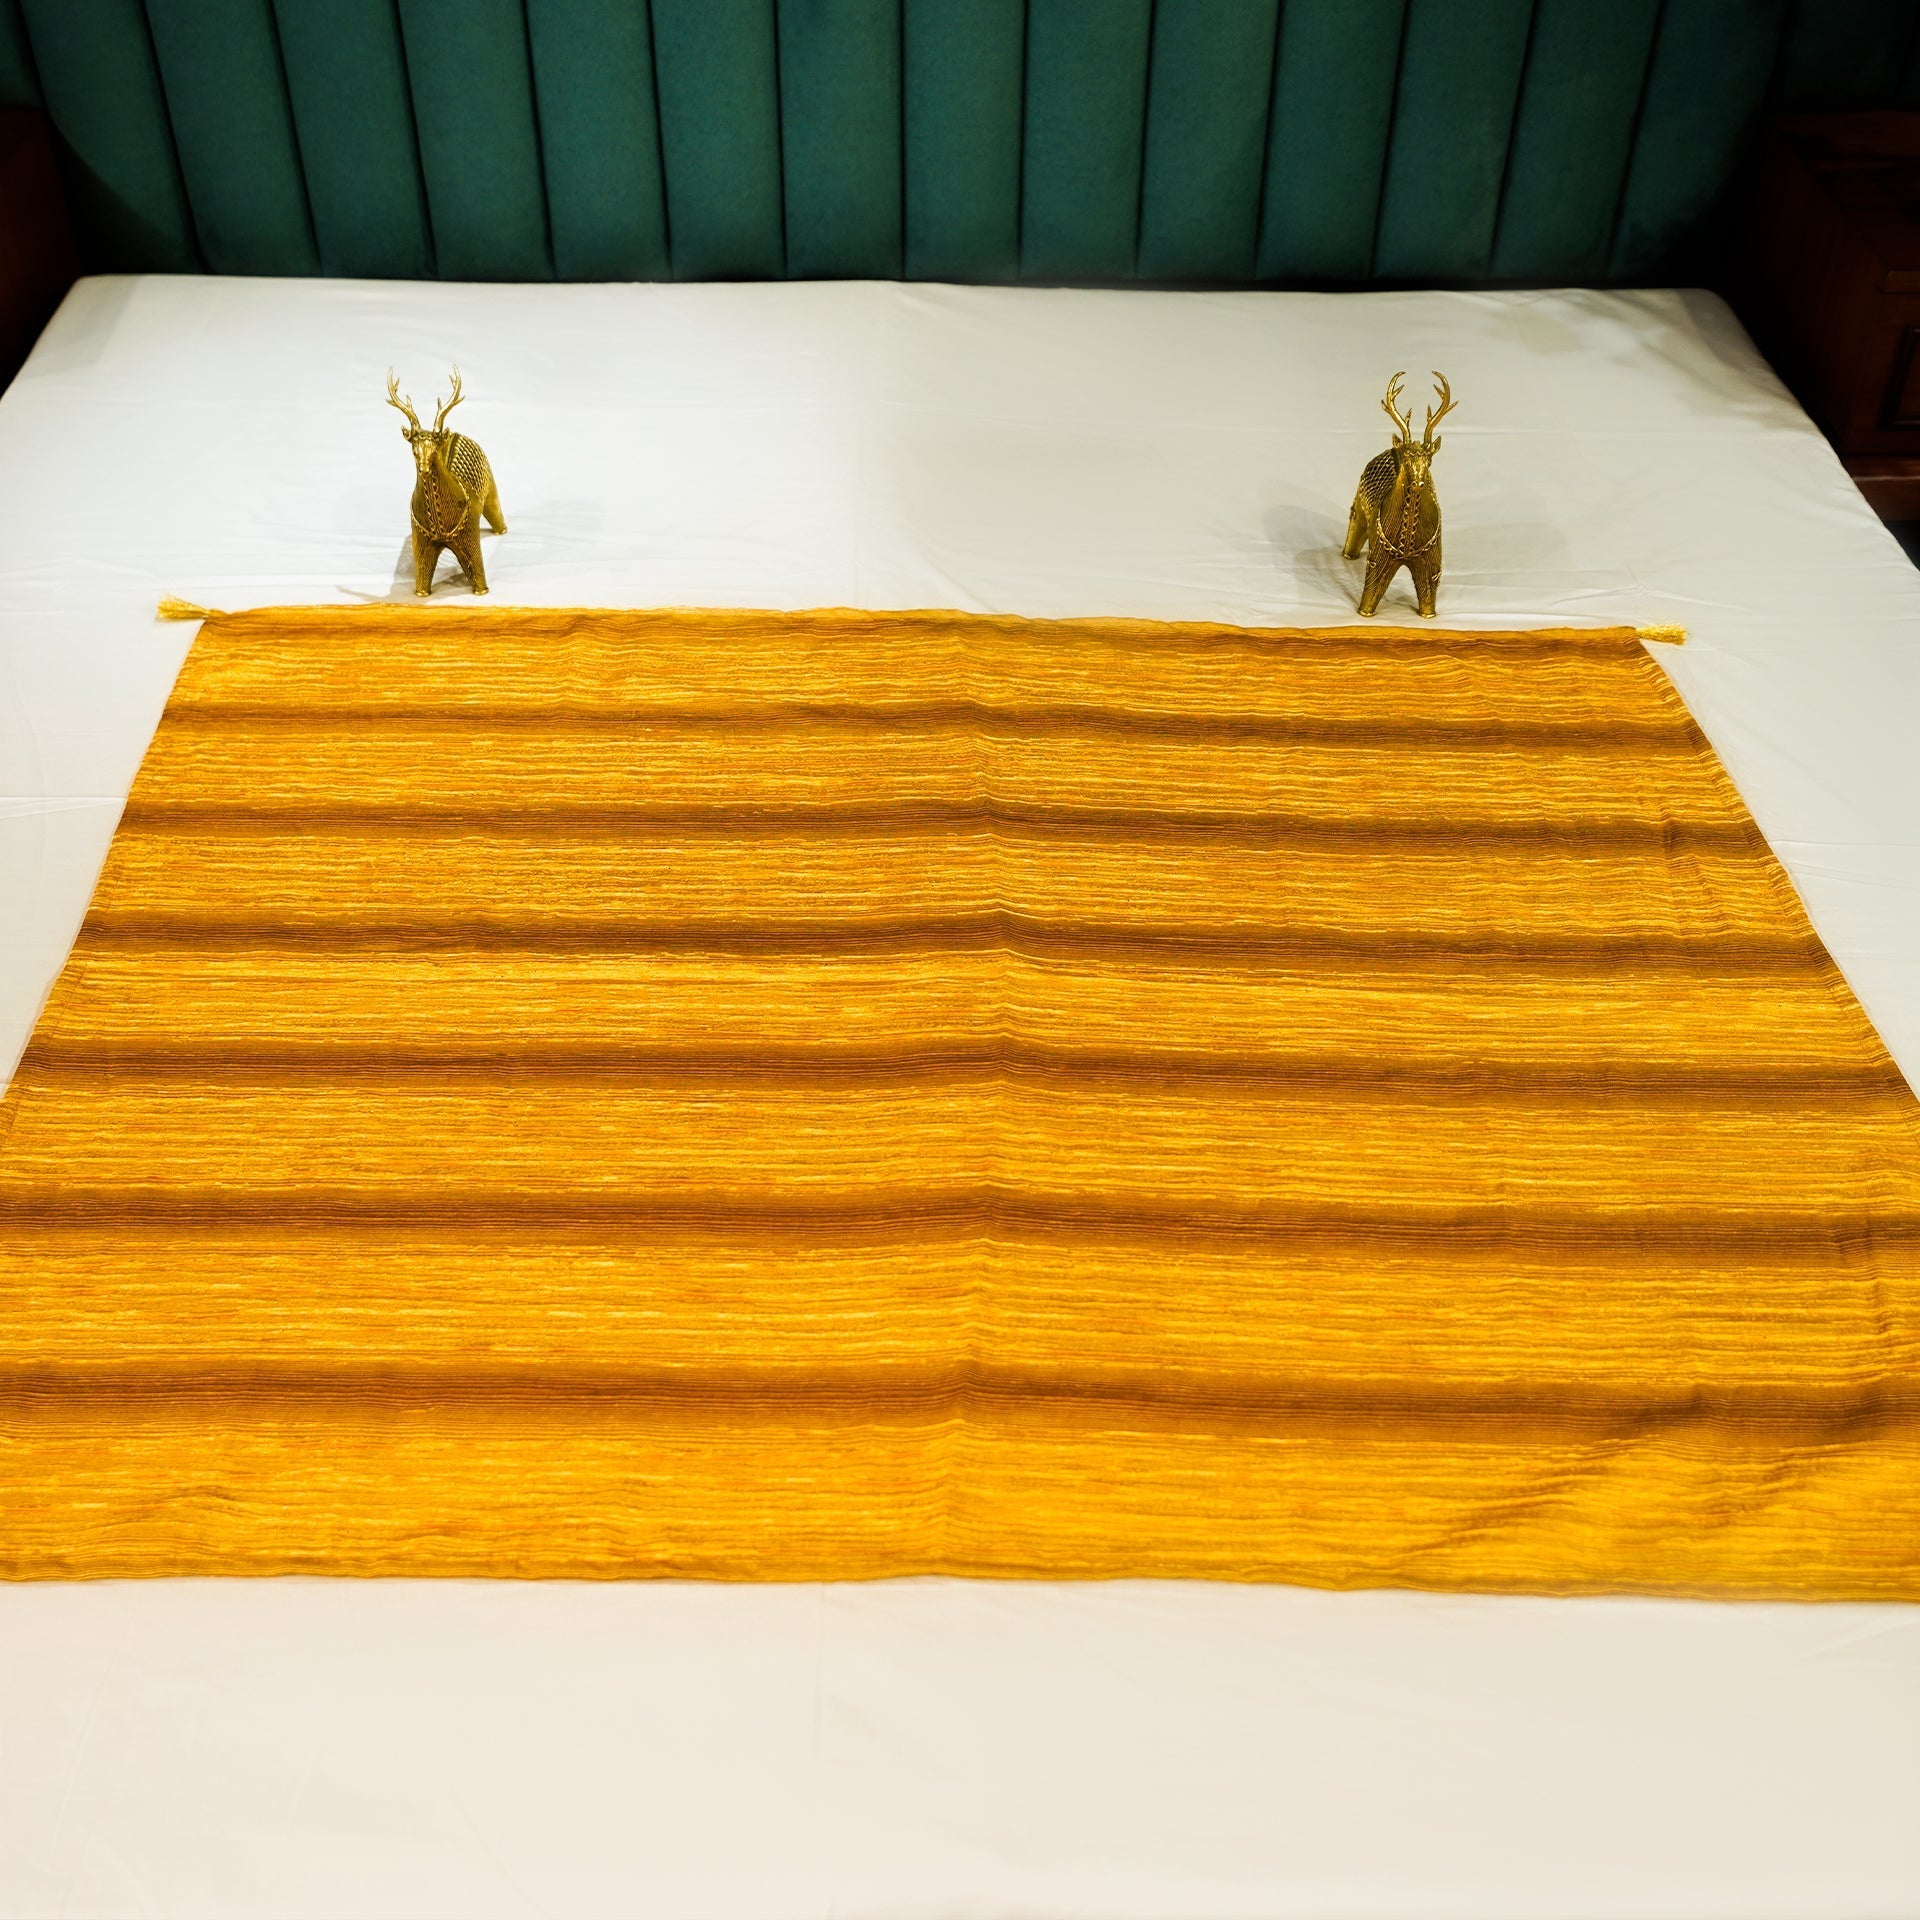 Gilded Spice Bed Throw at Kamakhyaa by Aetherea. This item is Bed Throws, Home, Metallic, Mustard, Satin, Upcycled